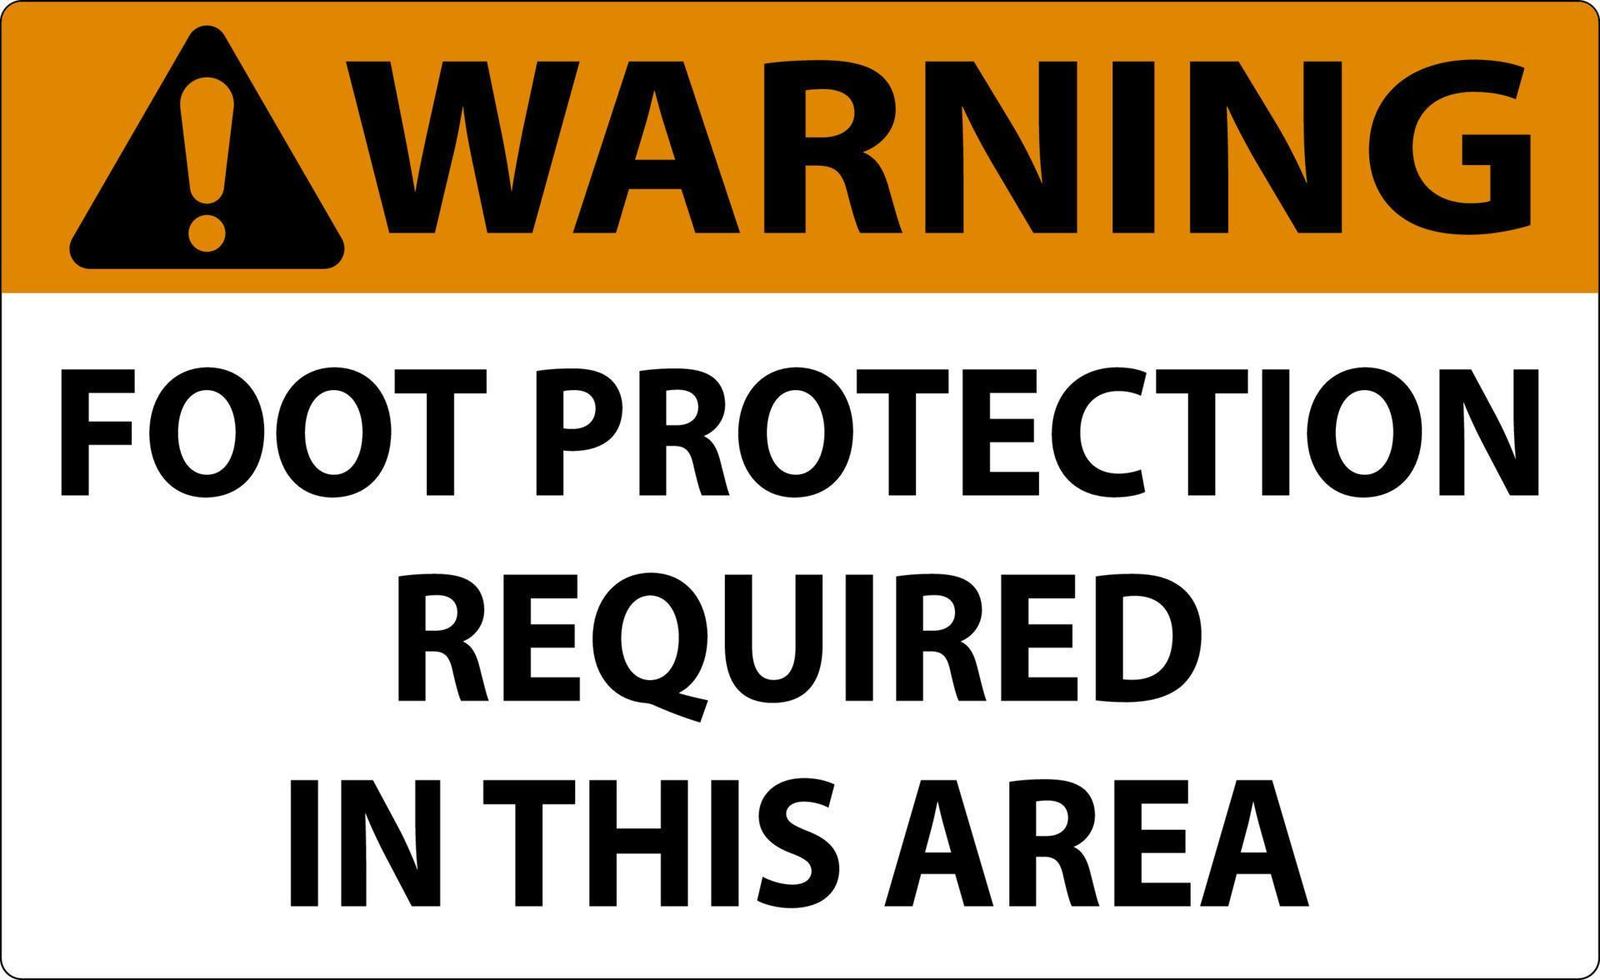 Warning Foot Protection Required in This area Sign vector